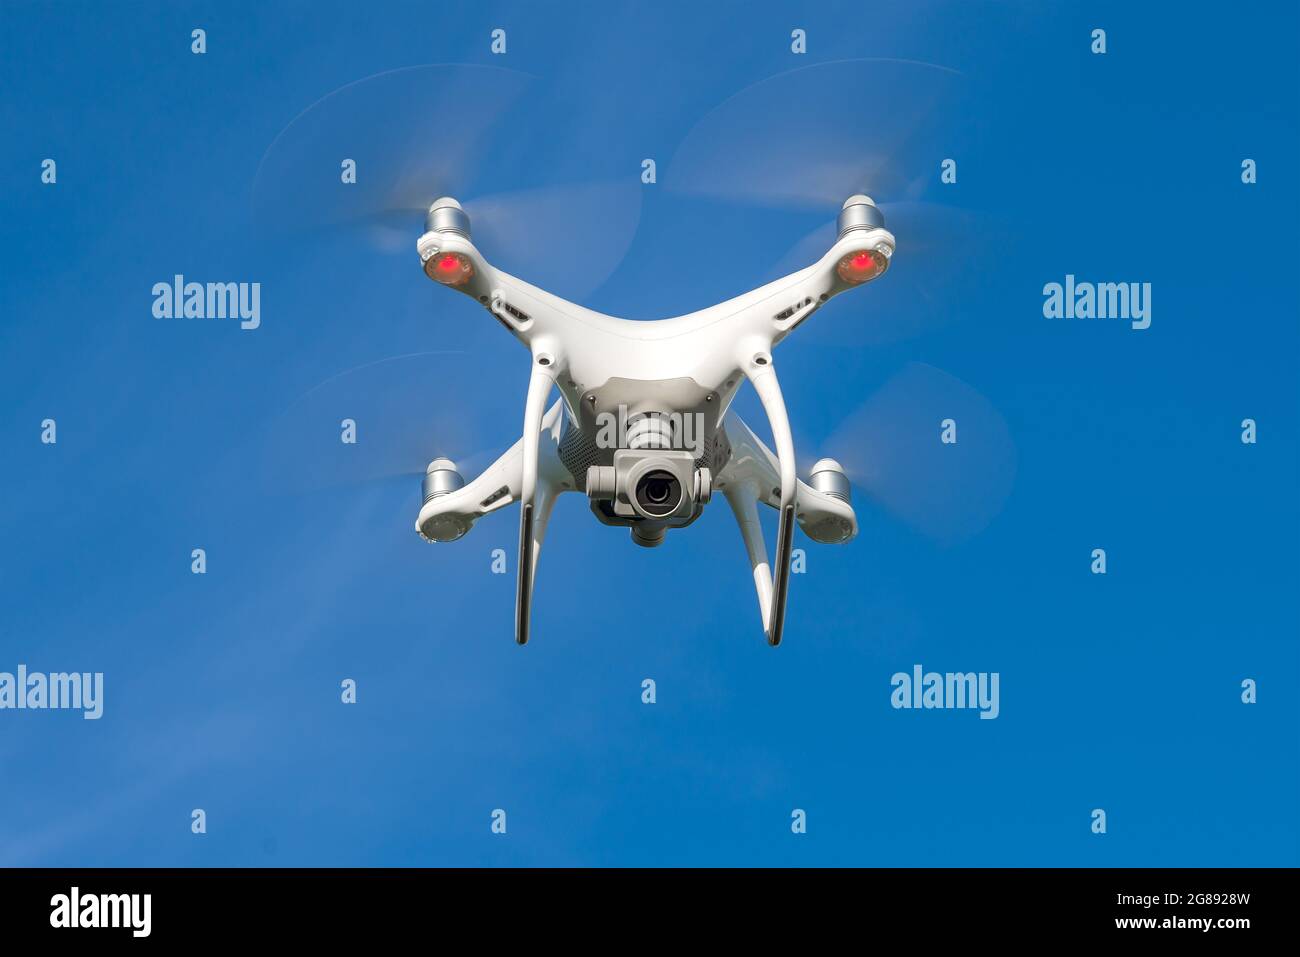 Flying quadcopter with downward facing camera close-up Stock Photo